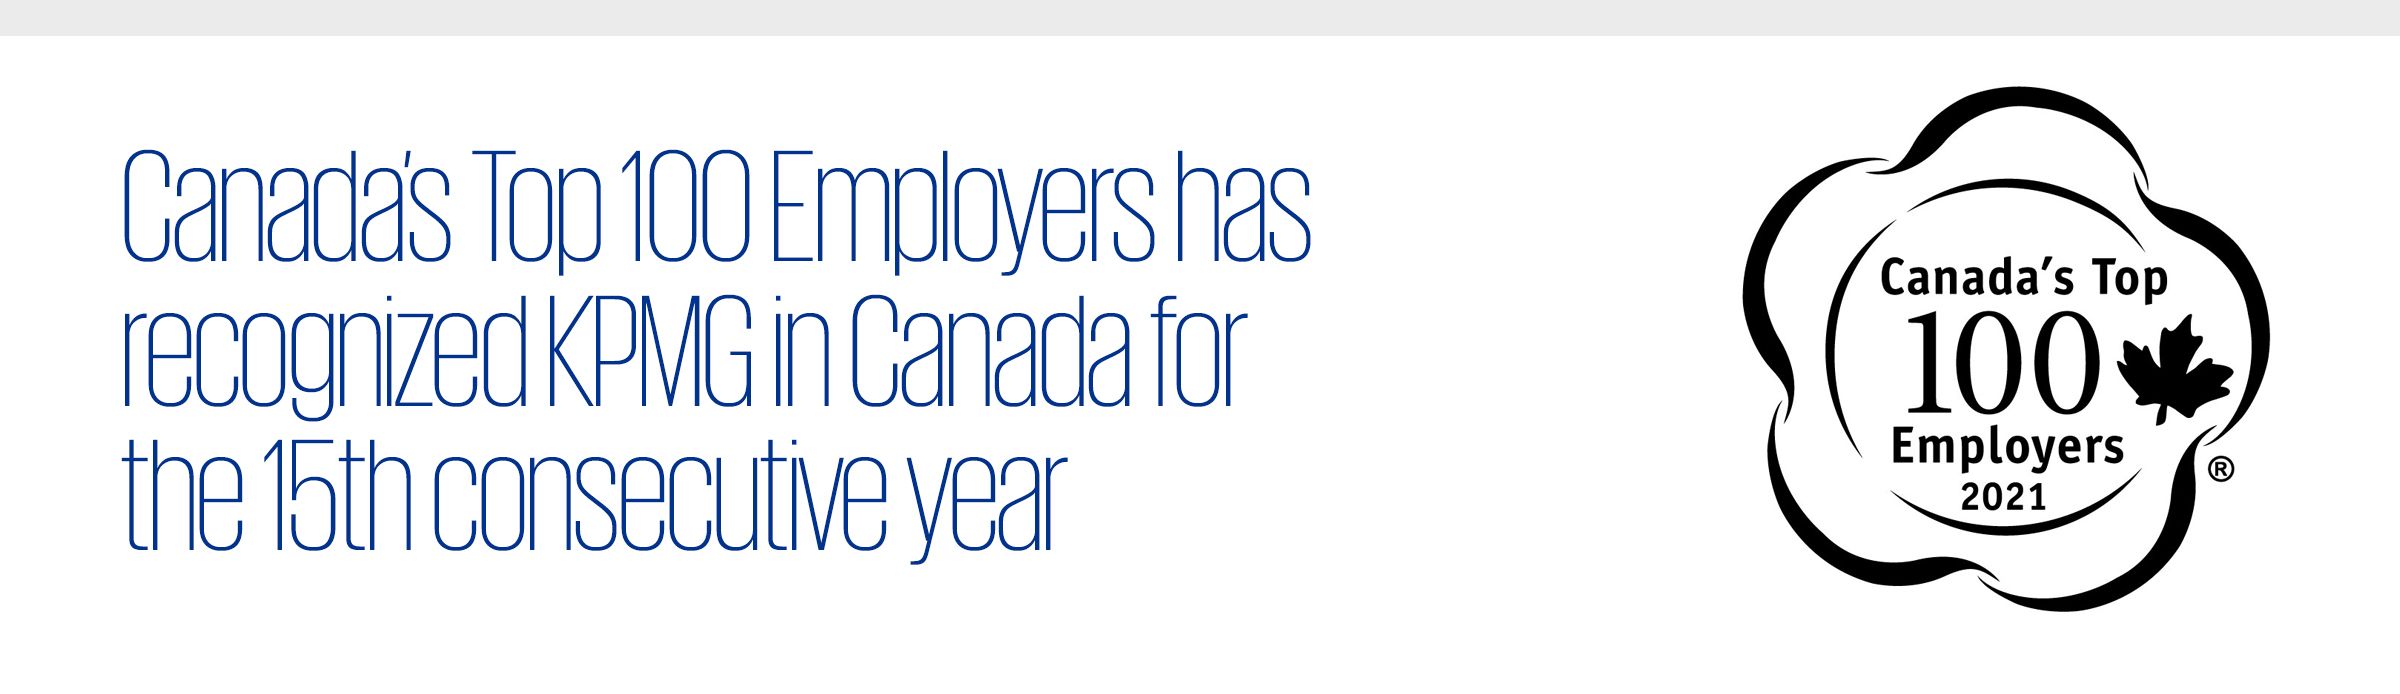 Canada’s Top 100 Employers has recognized KPMG in Canada for the 15th consecutive year